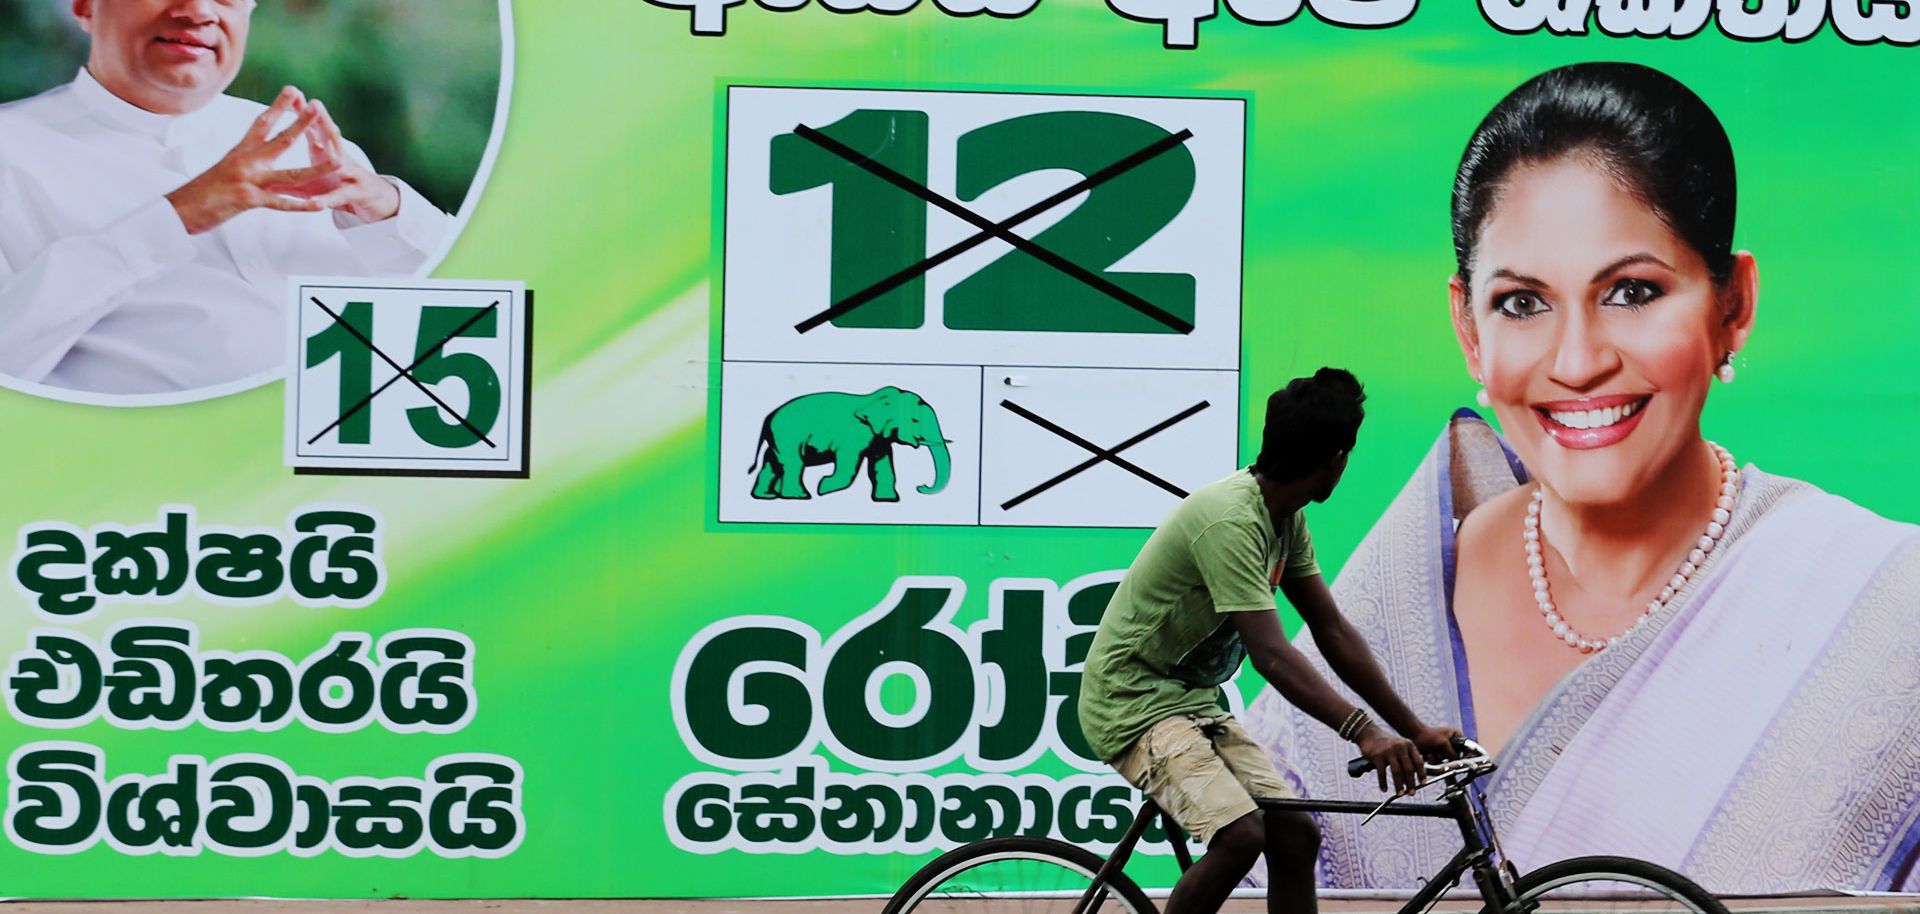 A Divided Sri Lanka Goes to the Polls